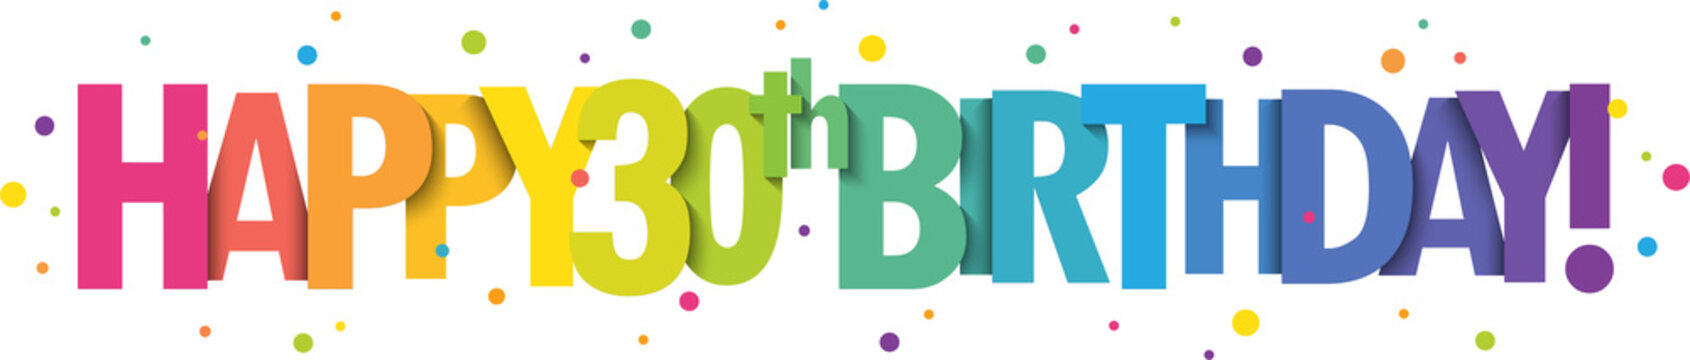 HAPPY 30th BIRTHDAY! colorful typography banner with dots on transparent background